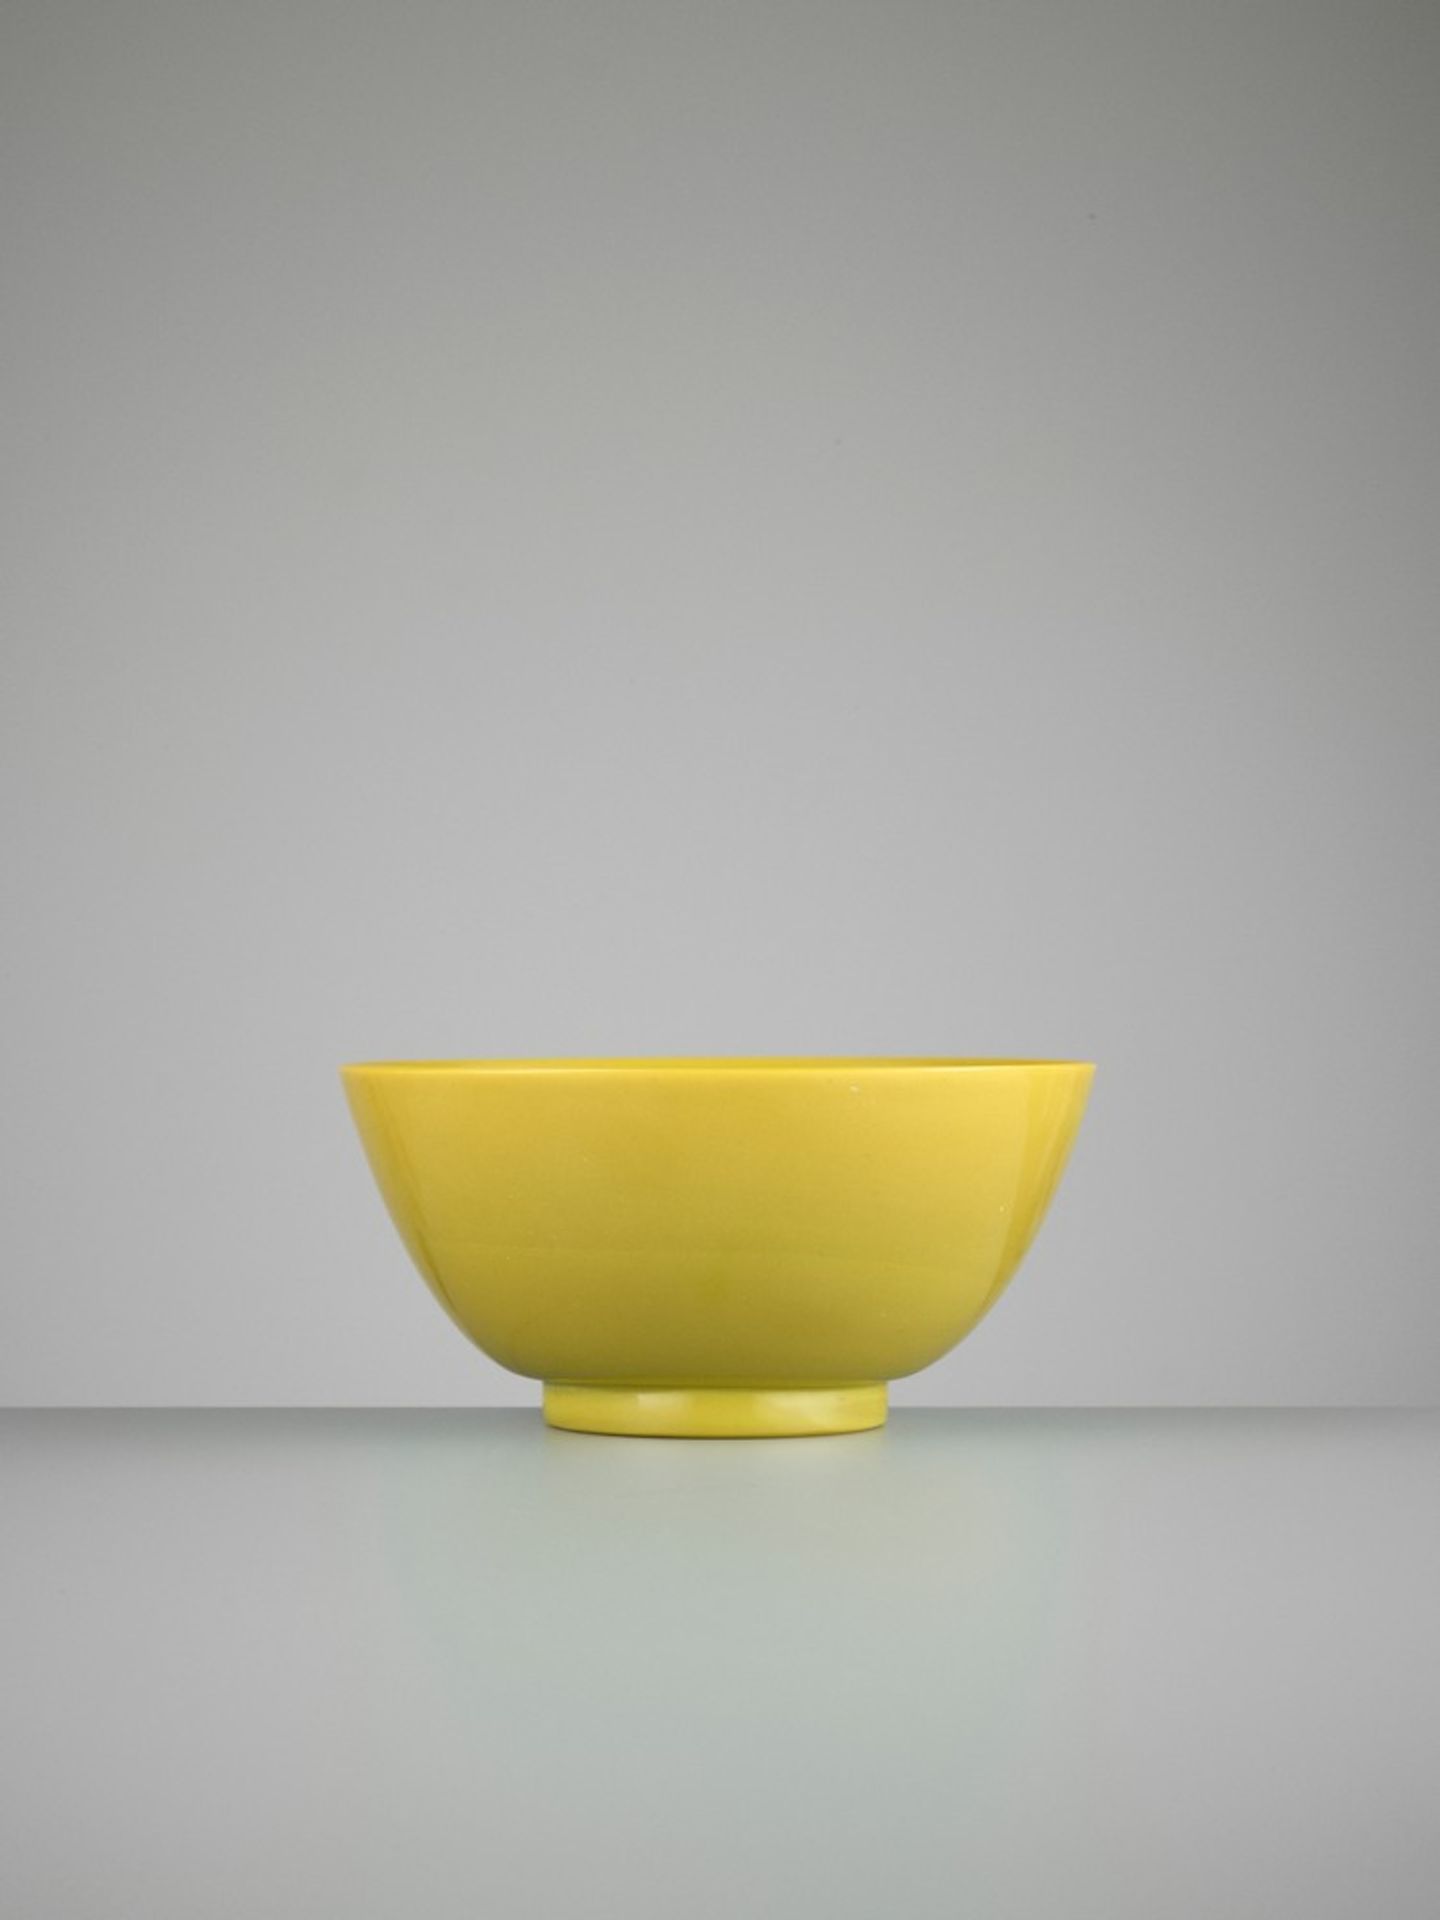 A MUSTARD-YELLOW GLASS BOWL, PROBABLY IMPERIAL, QING DYNASTY - Image 5 of 10